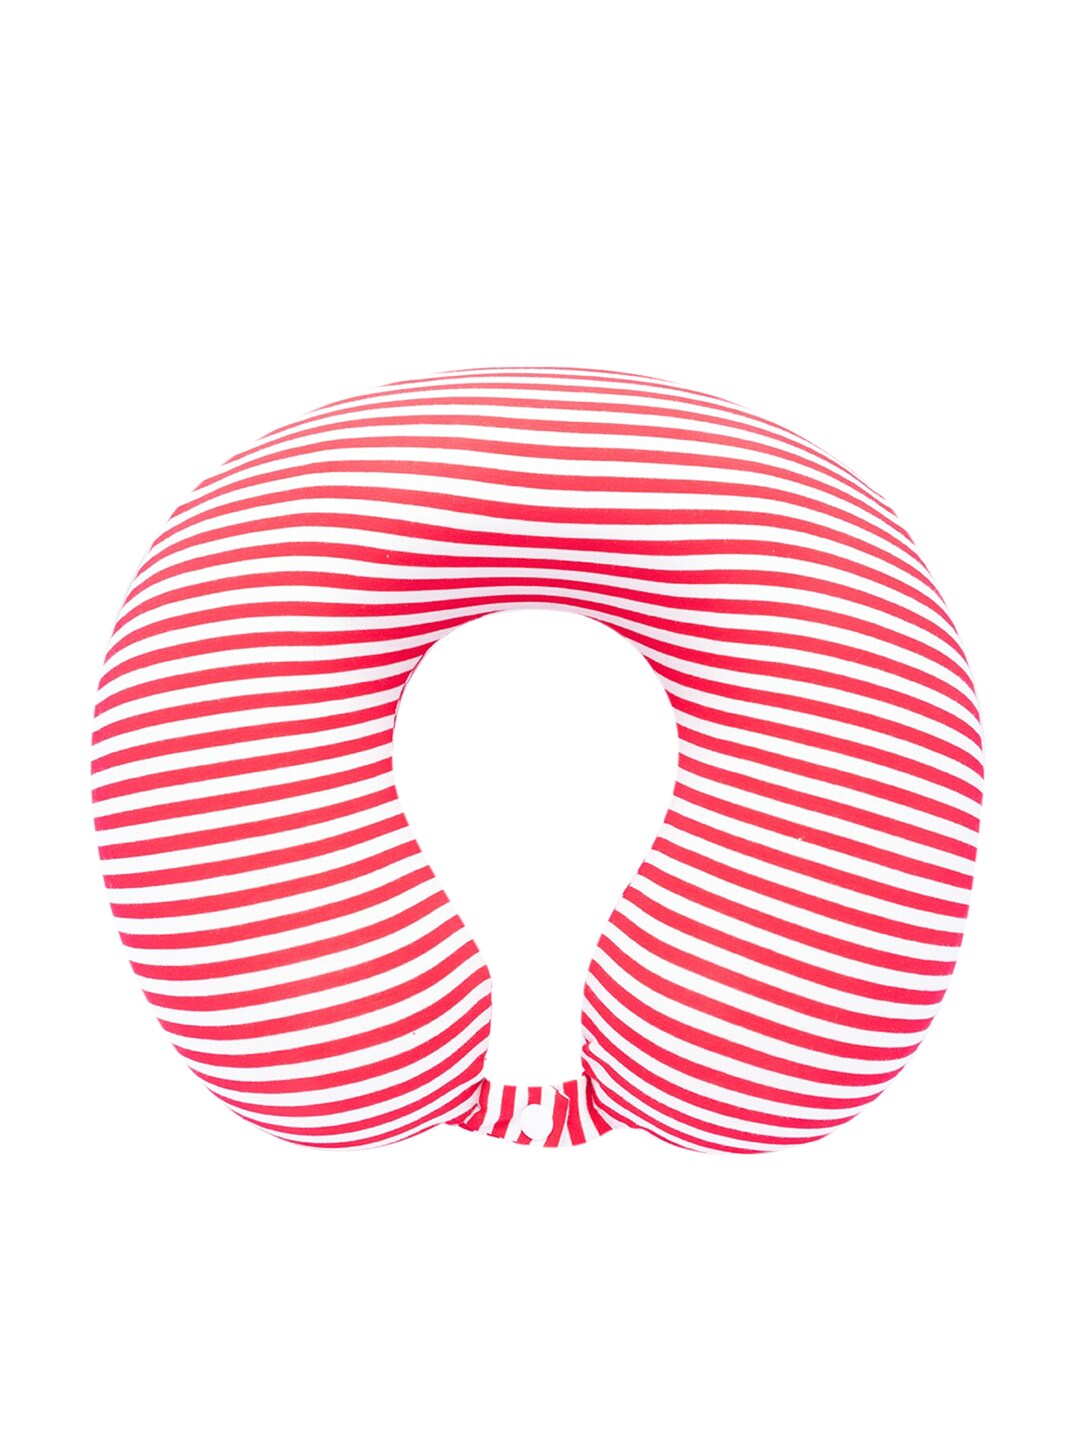 MARKET99 Red & White Striped Neck Support Travel Pillow Price in India